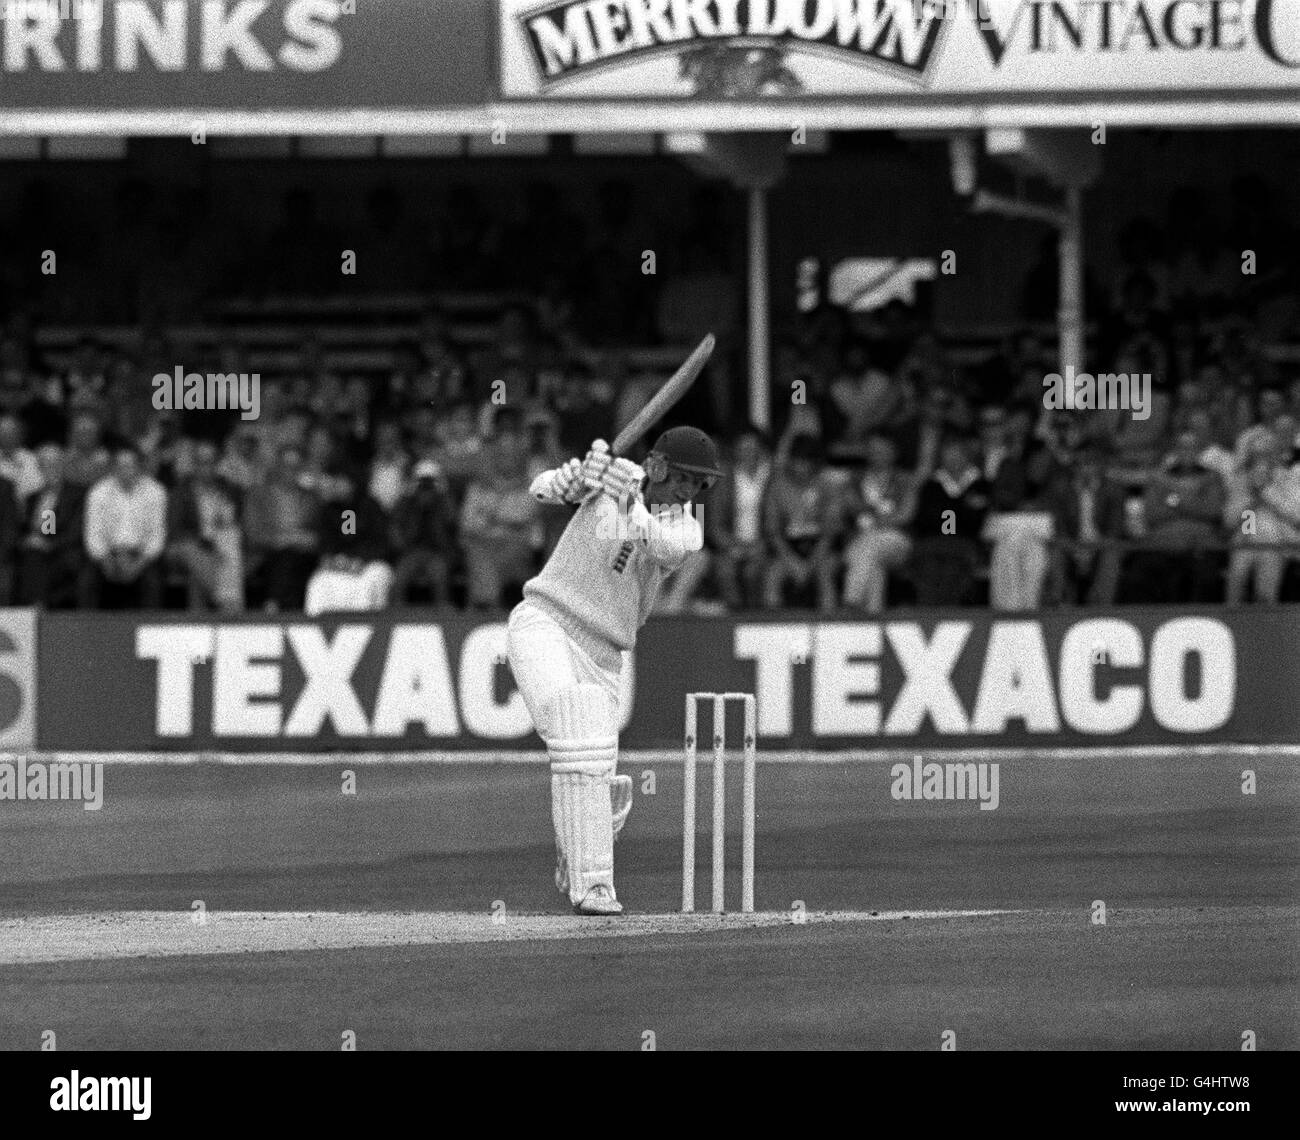 PA NEWS PHOTO ENGLAND BATSMEN DAVID GOWER HITS A FOUR OFF AUSTRALIAN BOWLER SIMON O'DONNELL DURING PLAY IN THE THIRD CORNHILL MATCH BETWEEN ENGLAND AND AUSTRALIA AT TRENT BRIDGE Stock Photo